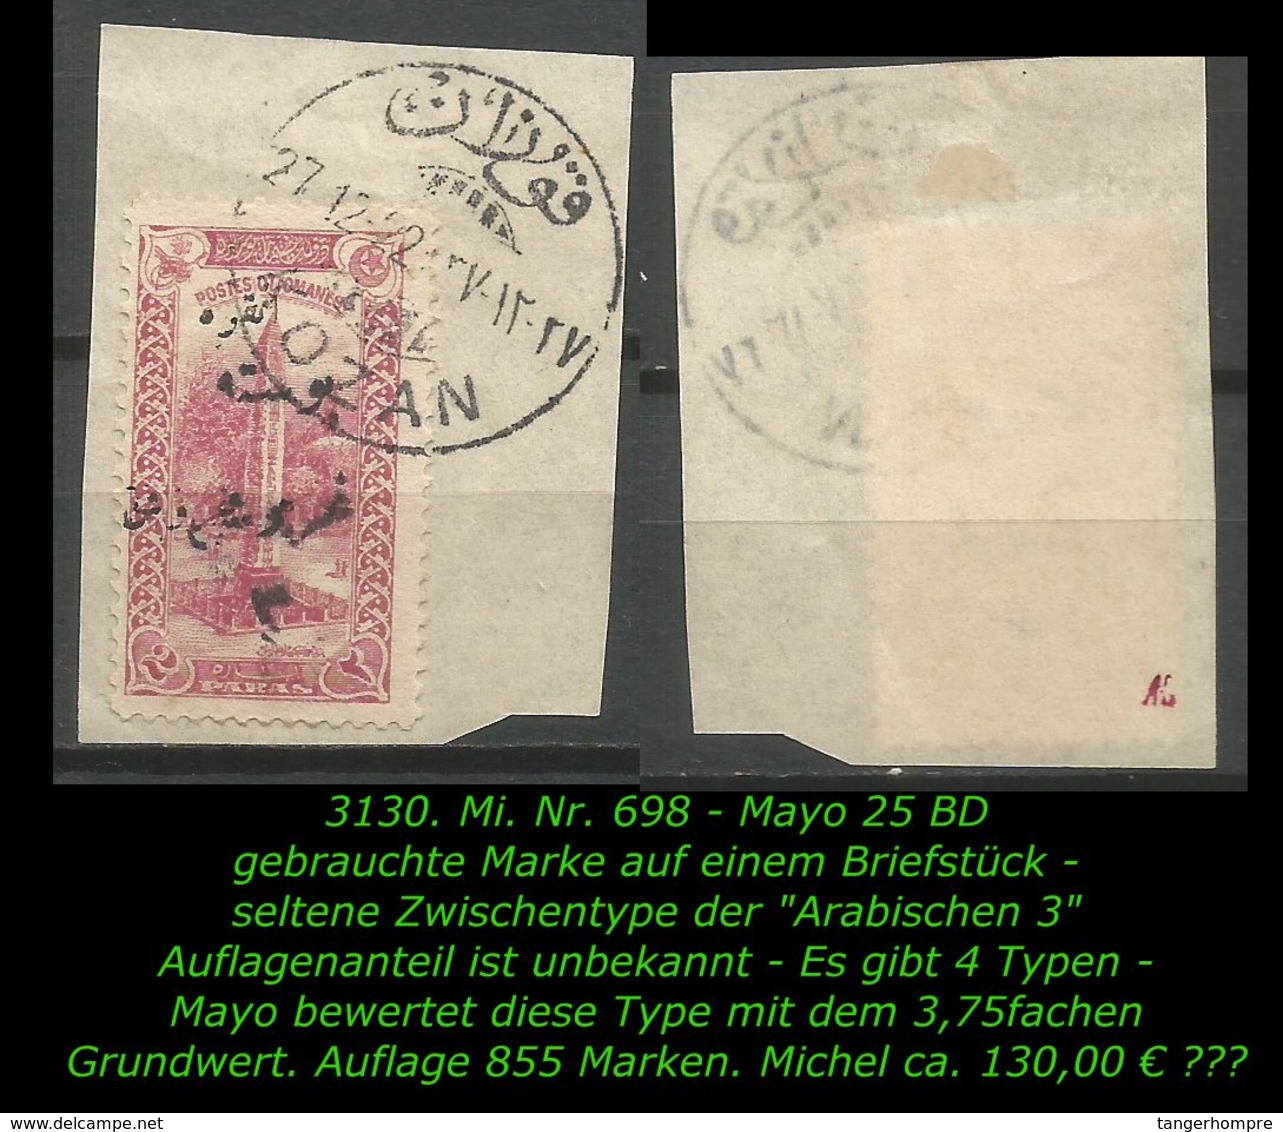 TURKEY ,EARLY OTTOMAN SPECIALIZED FOR SPECIALIST, SEE...Mi. Nr. 698 - Mayo 25 BD -RR- - 1920-21 Anatolie